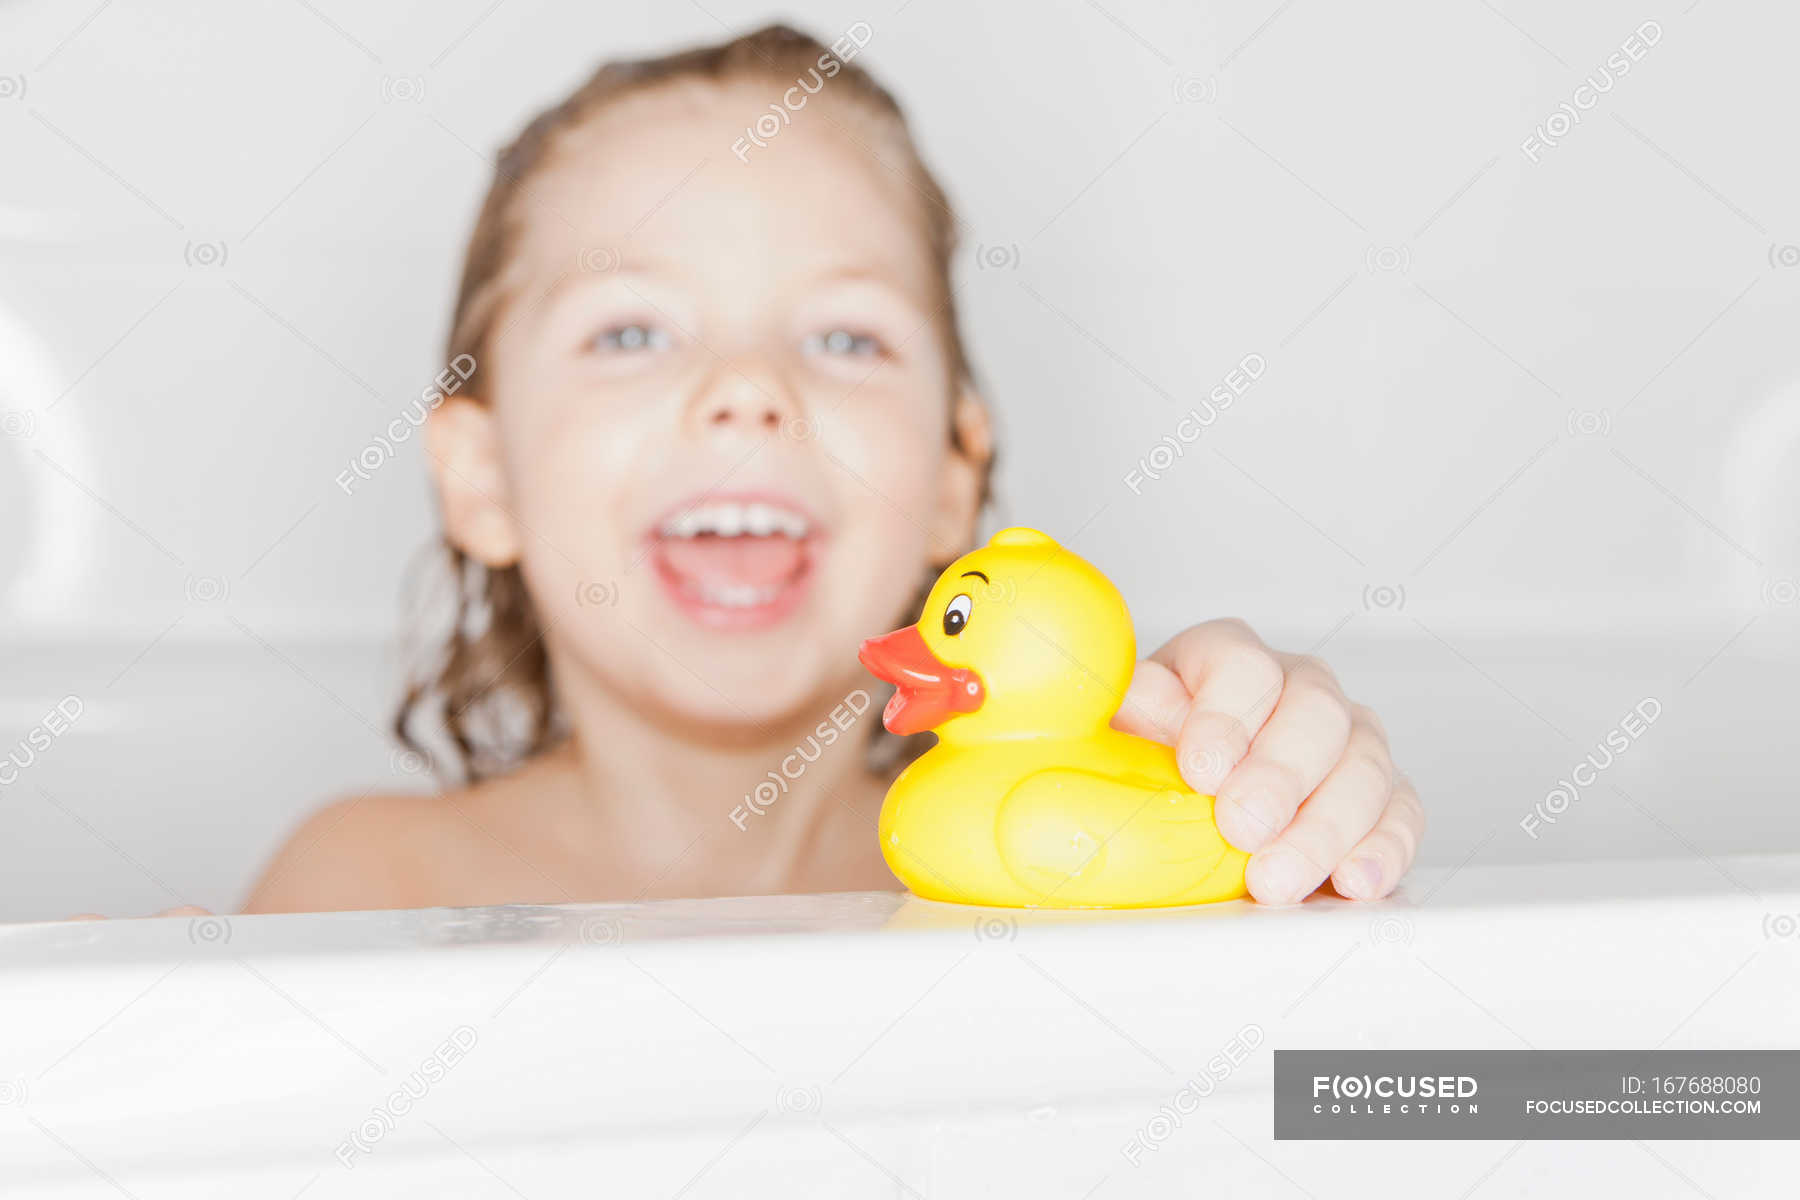 Girl Playing With Rubber Duck In Bath, Rubber Duck Bathtub